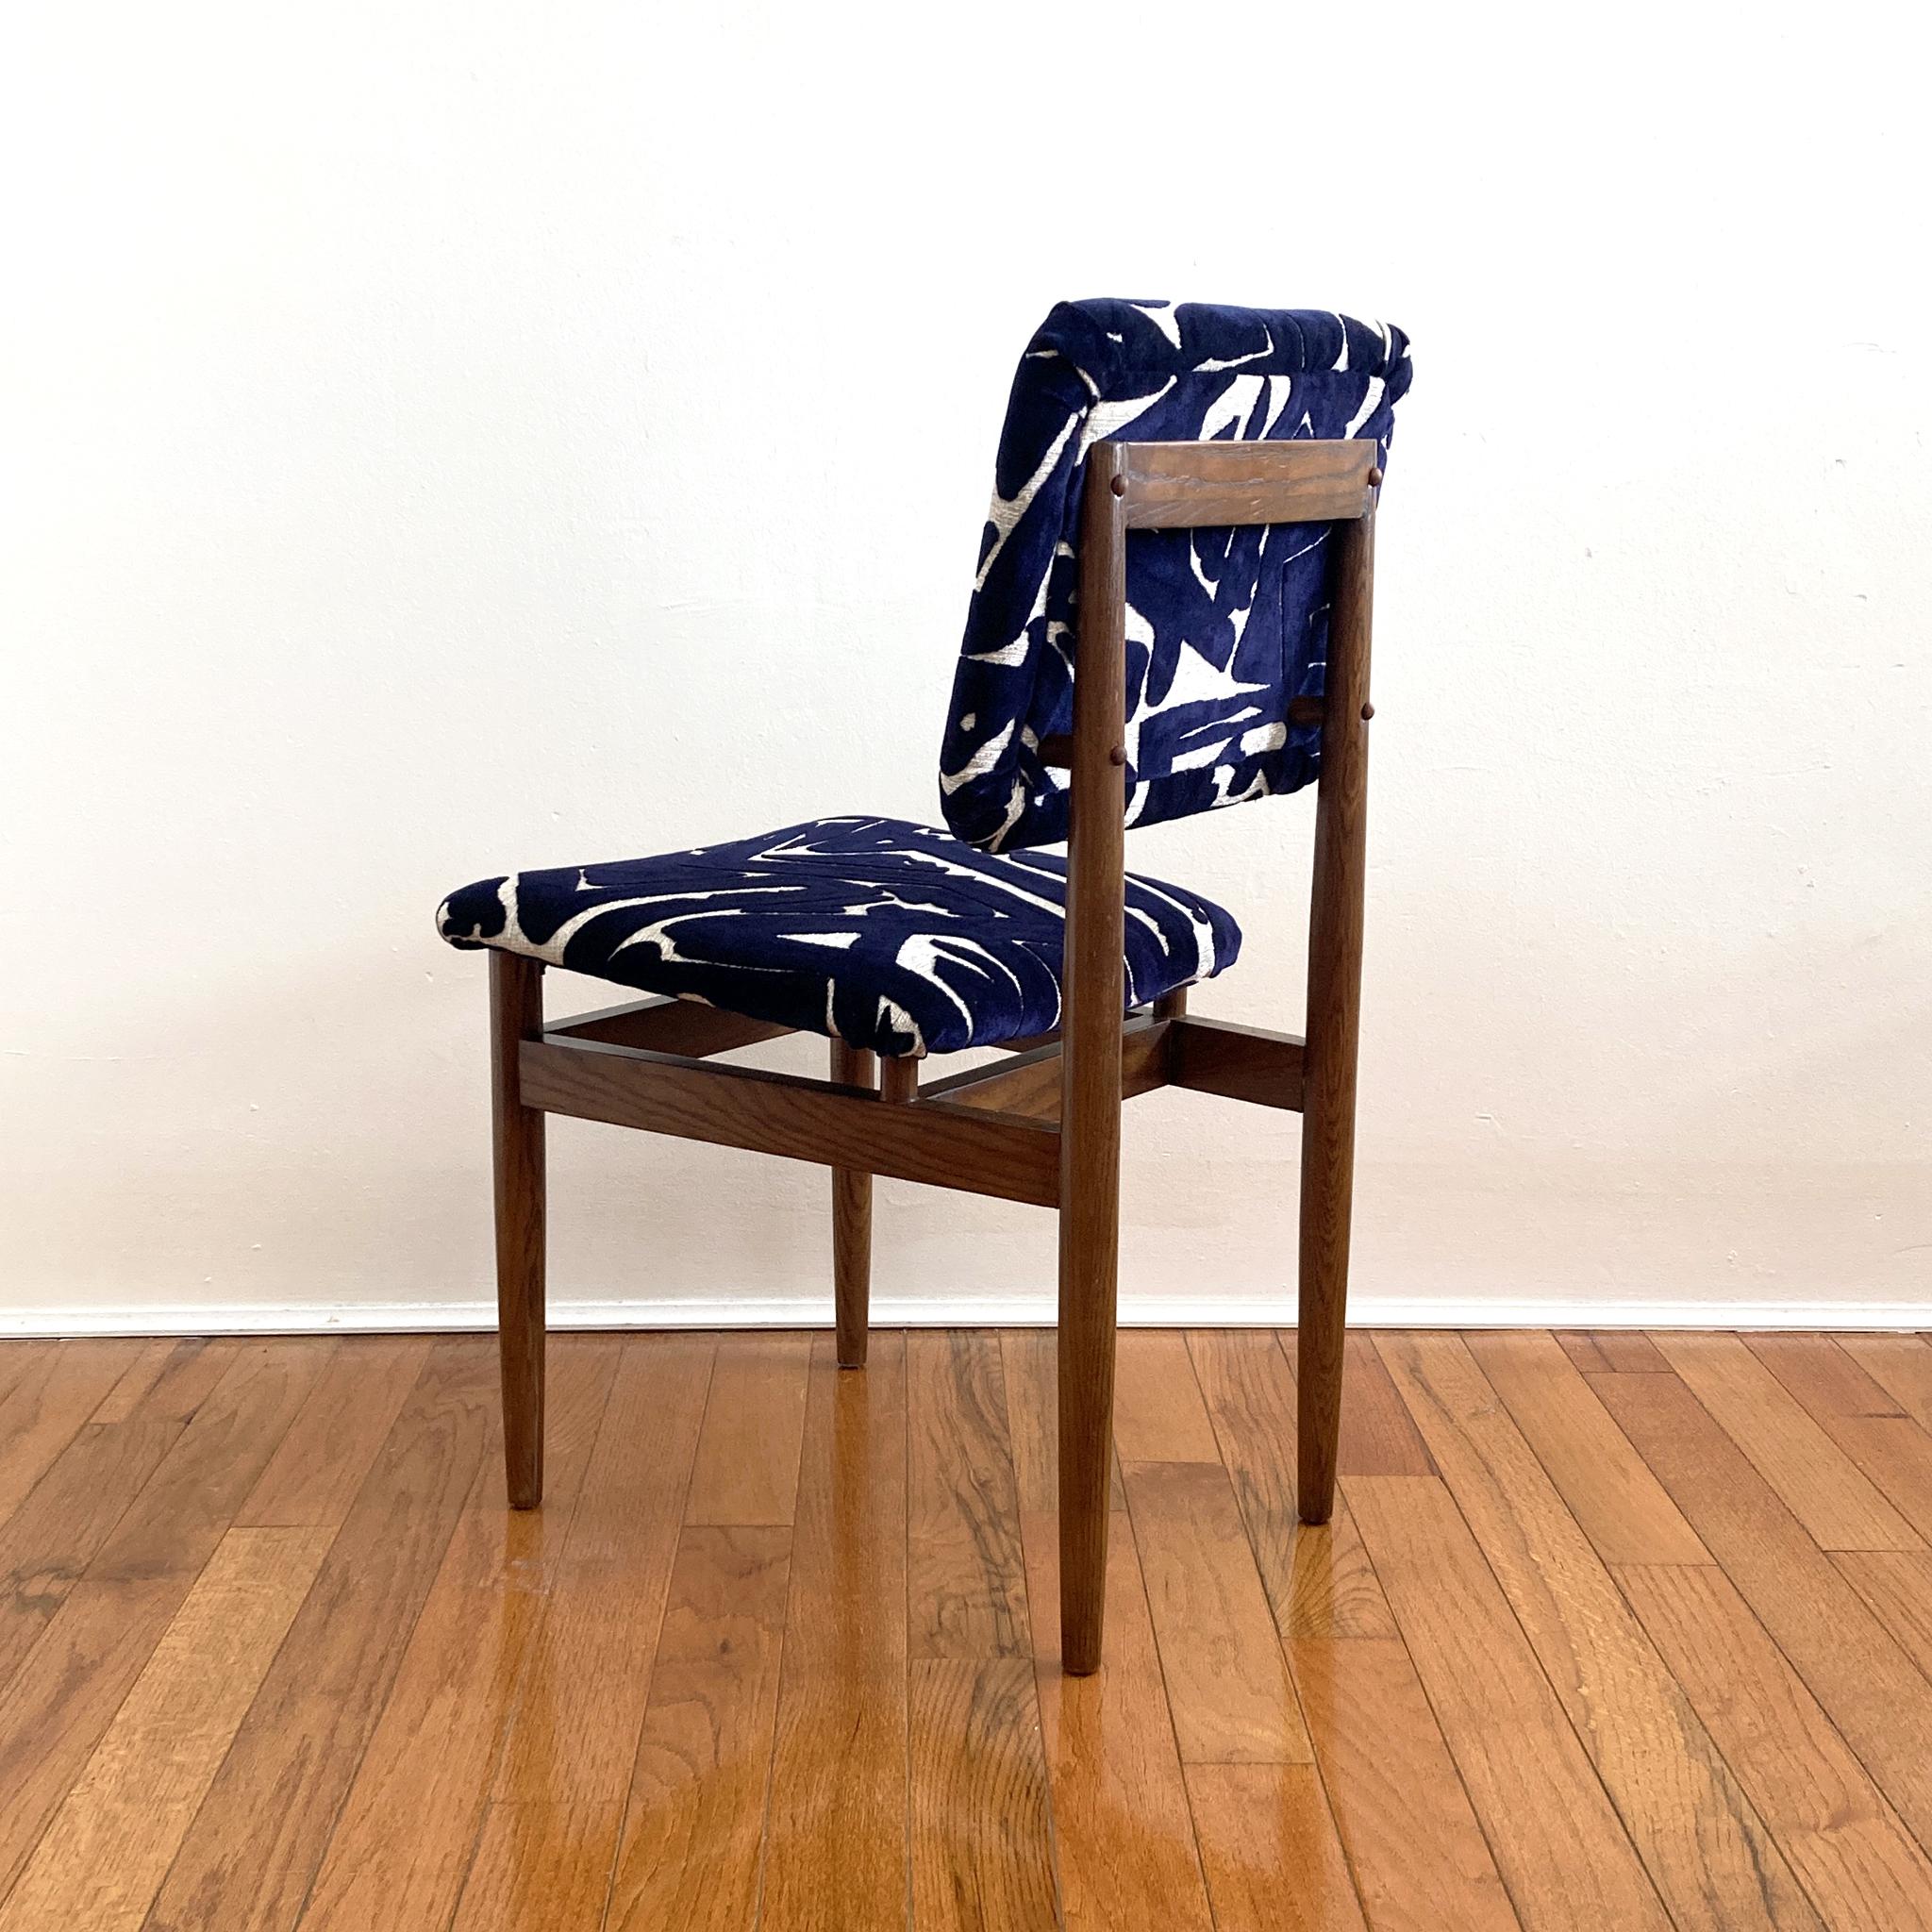 Arne Vodder Style Midcentury Chair Reupholstered in Abstract Blue and Ecru For Sale 3